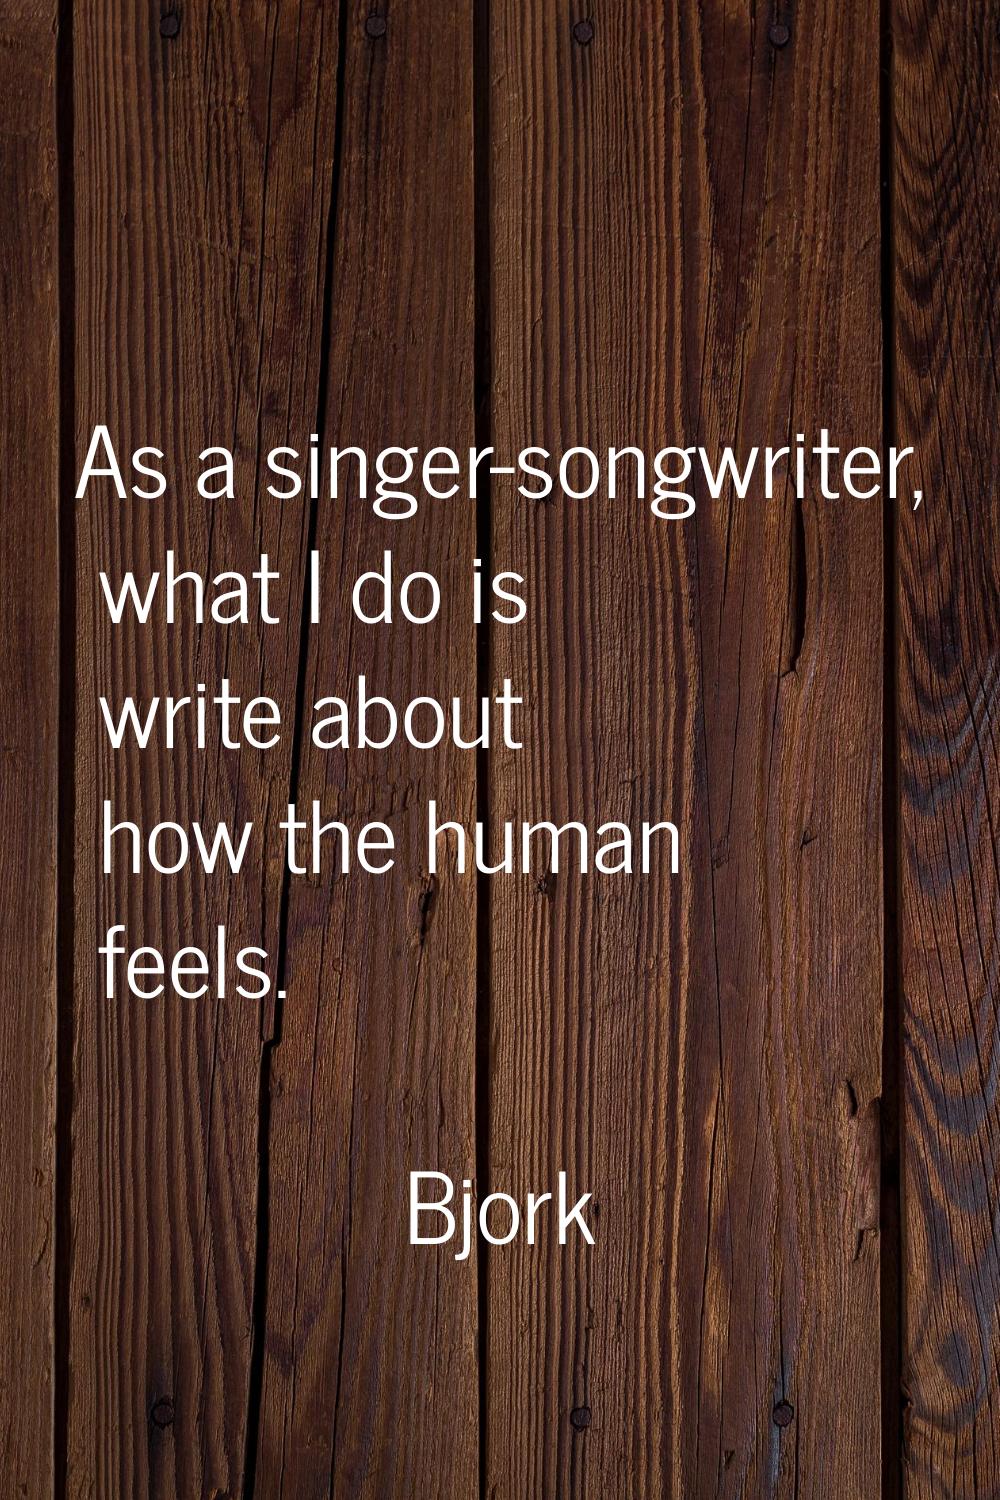 As a singer-songwriter, what I do is write about how the human feels.